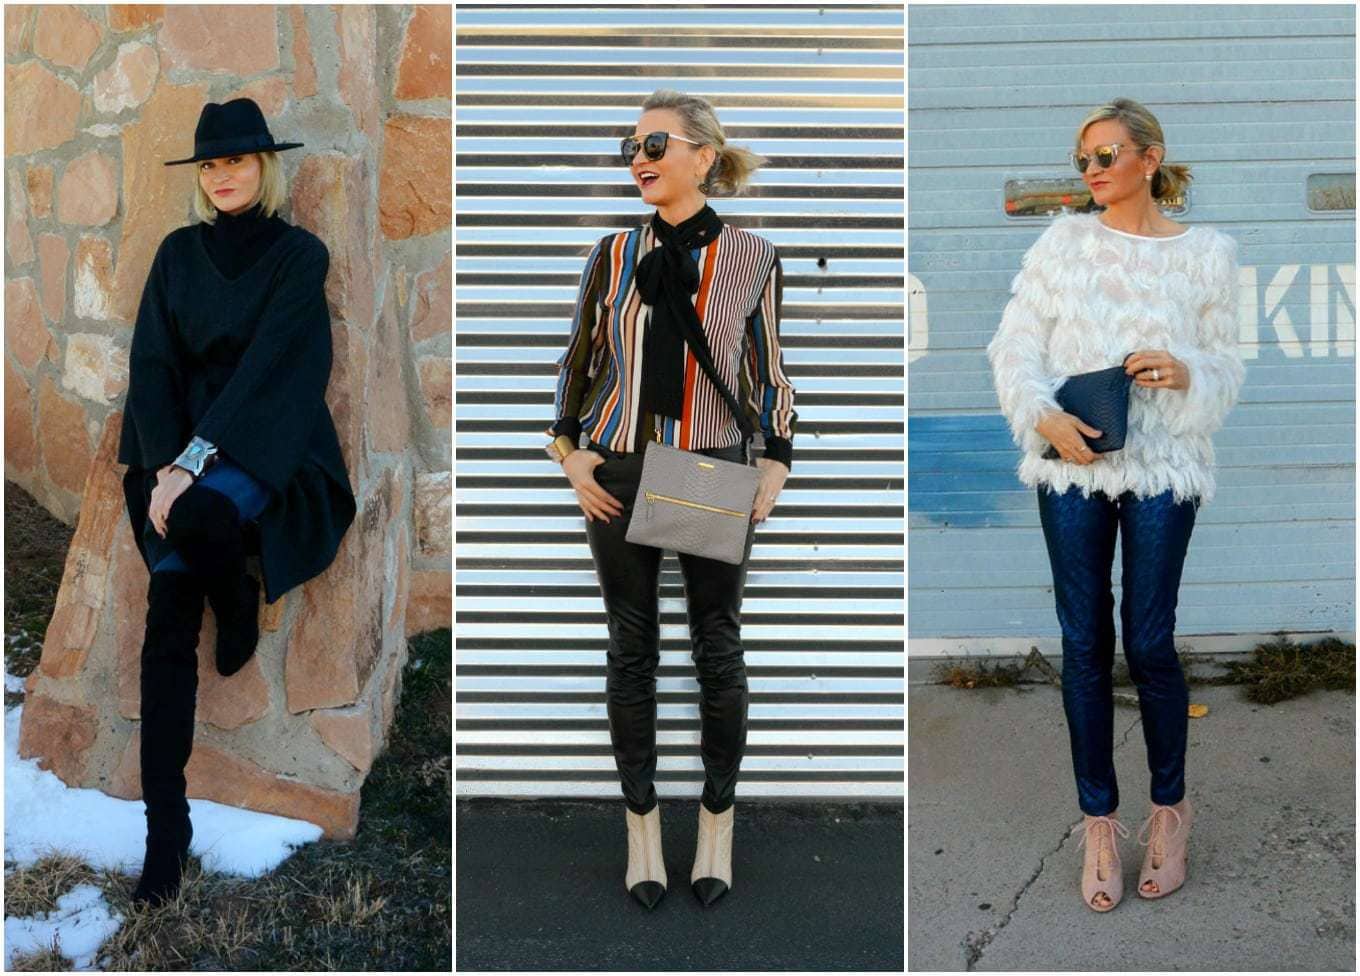 Best Over 40 Fashion Blogs - More Than Turquoise - featured by popular Washington DC over 40 fashion blogger, Wardrobe Oxygen